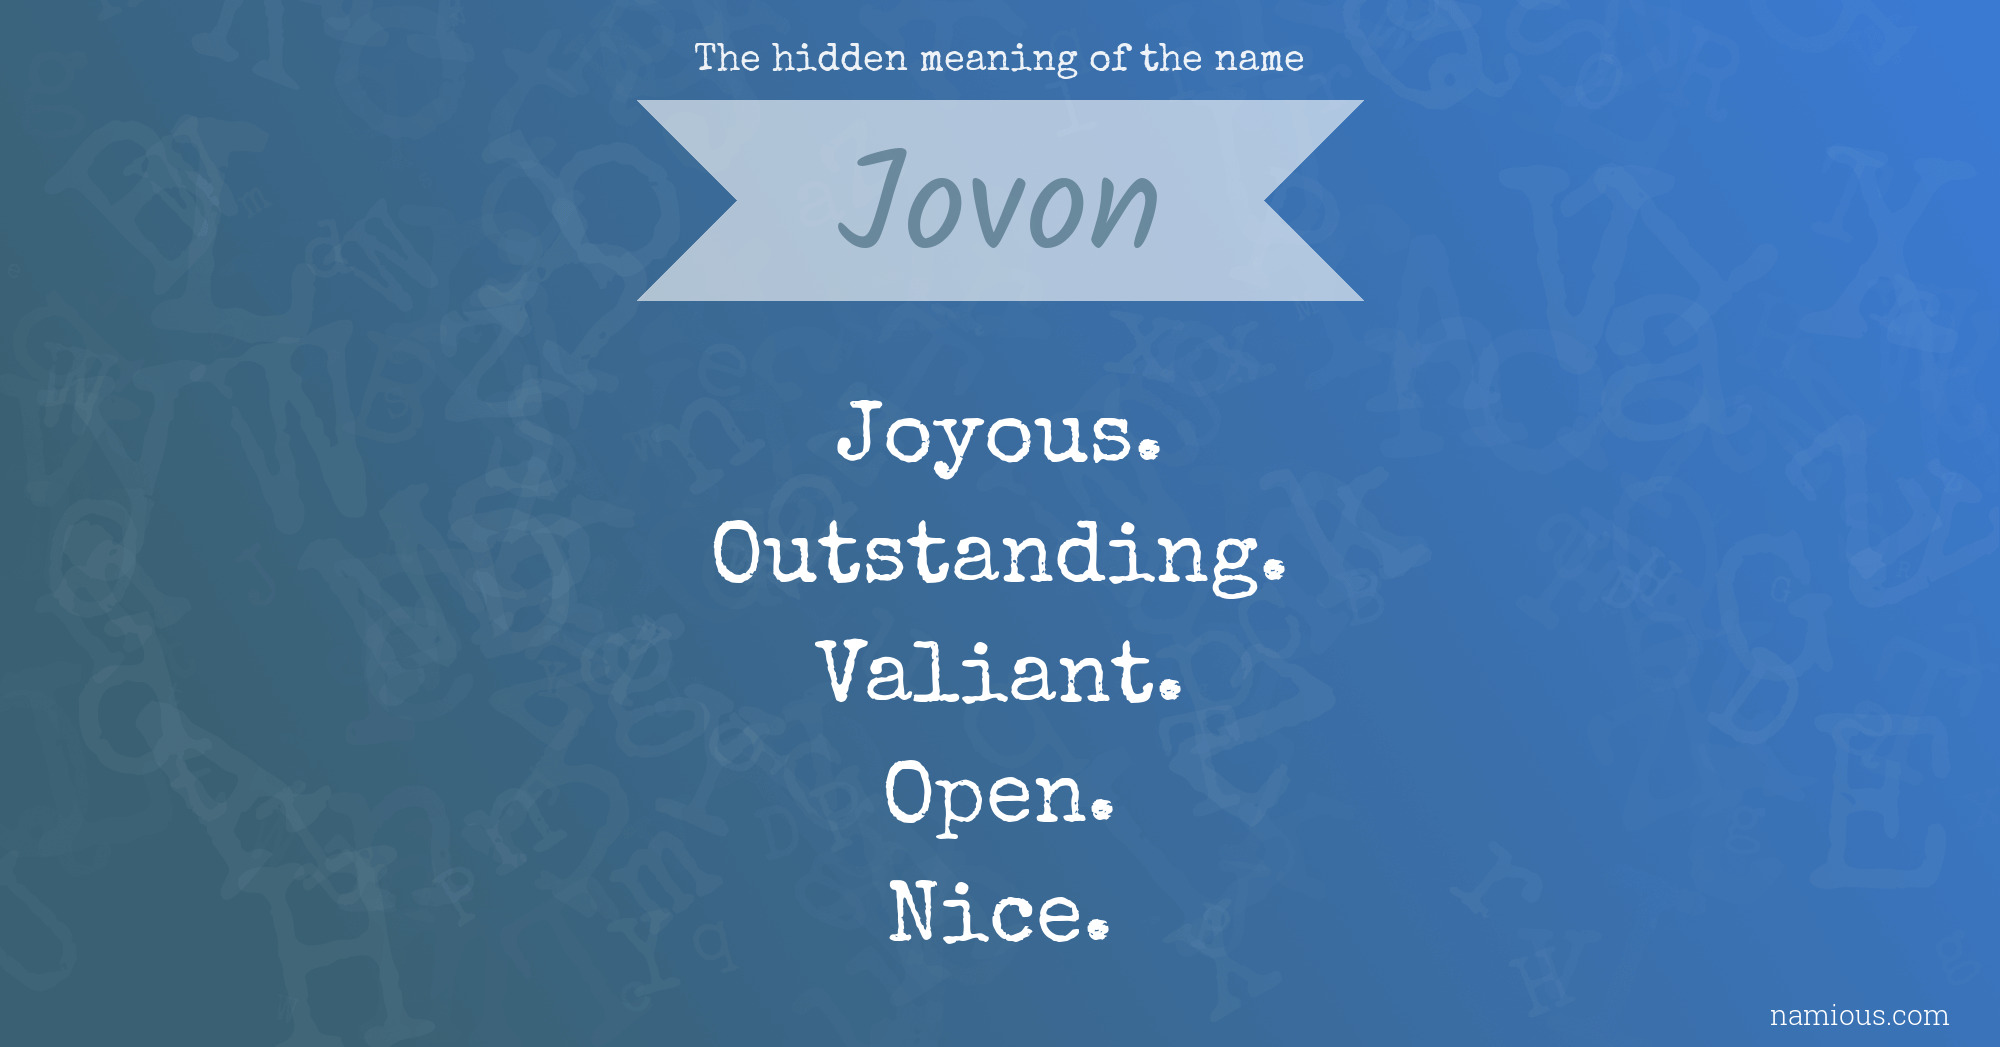 The hidden meaning of the name Jovon